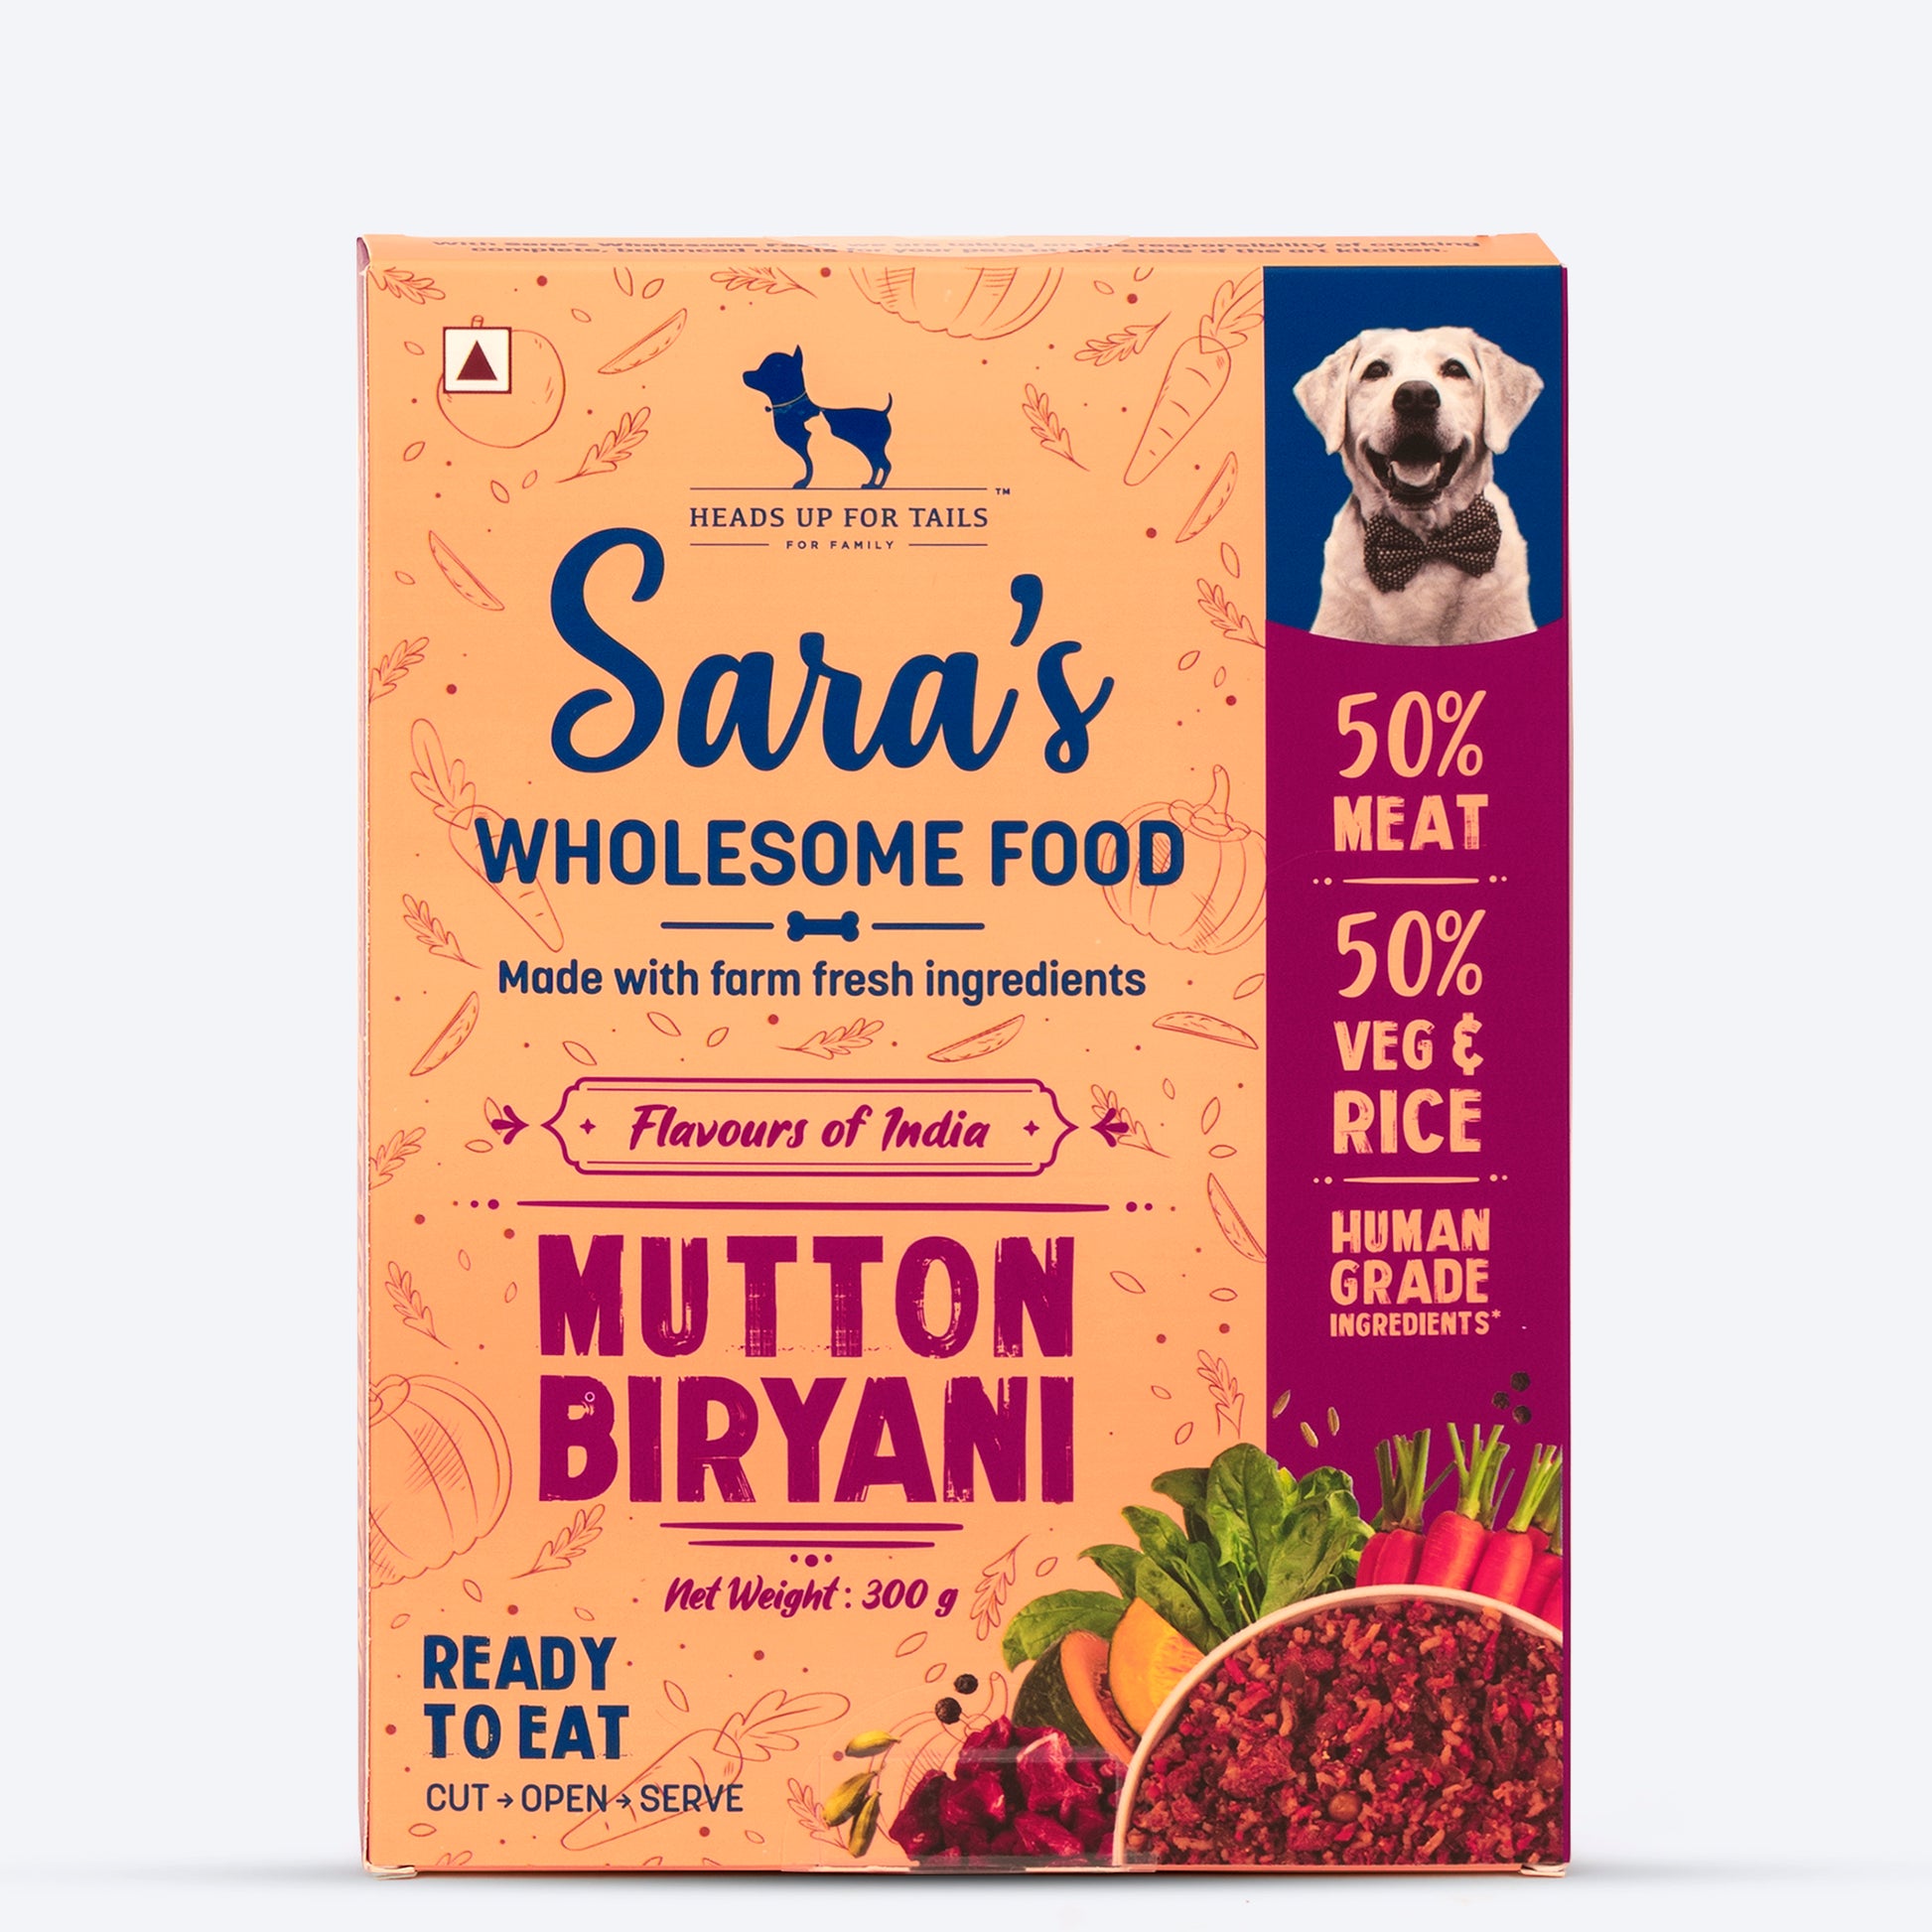 HUFT Sara€™s Wholesome Food (Flavours of India) - Mutton Biryani (300 g) - Heads Up For Tails